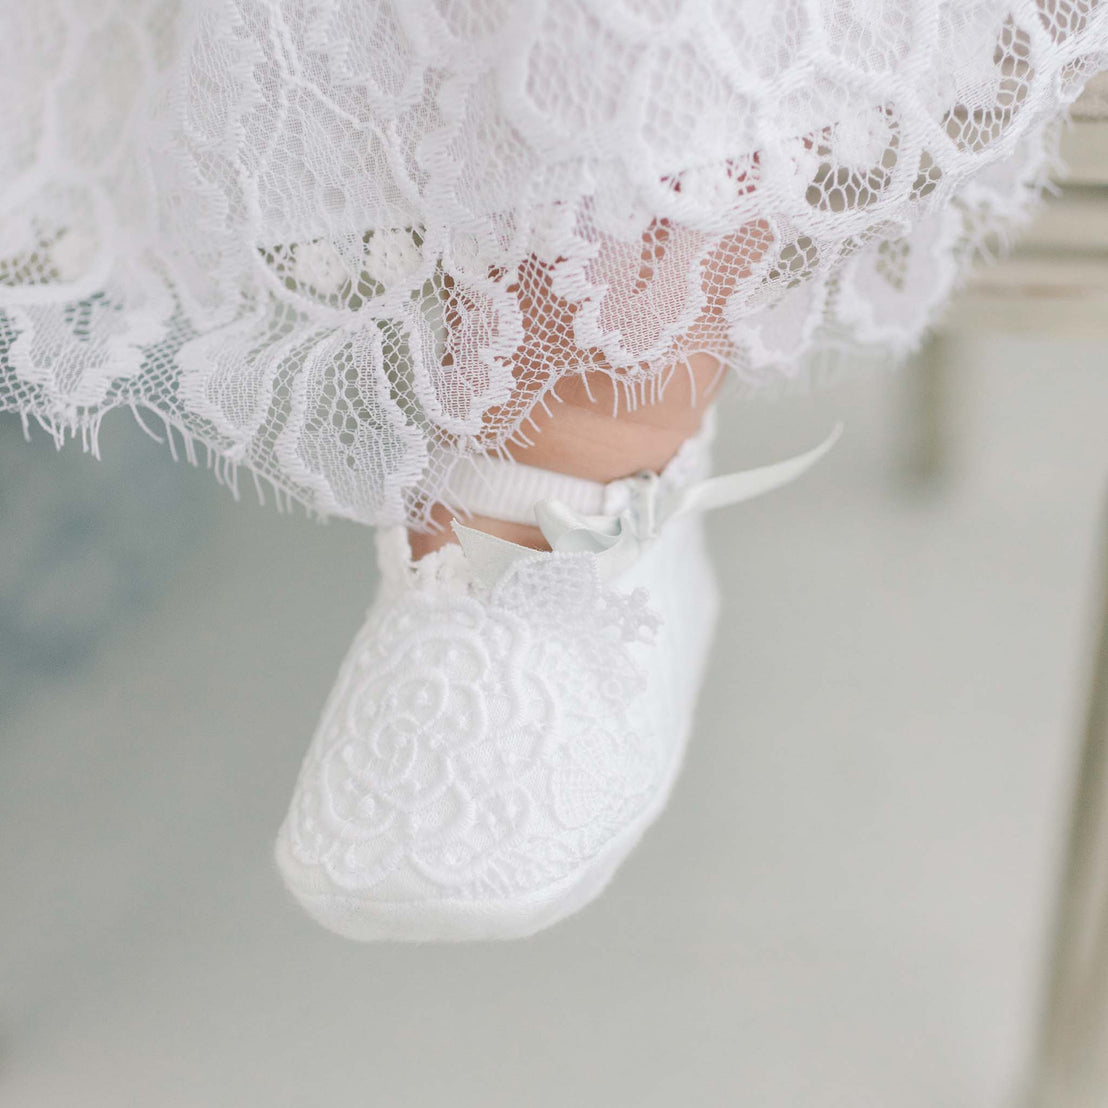 A close-up of a baby's foot dressed in a delicate white lace sock and a tiny white shoe, hanging gently in the air with a soft, blurred background.